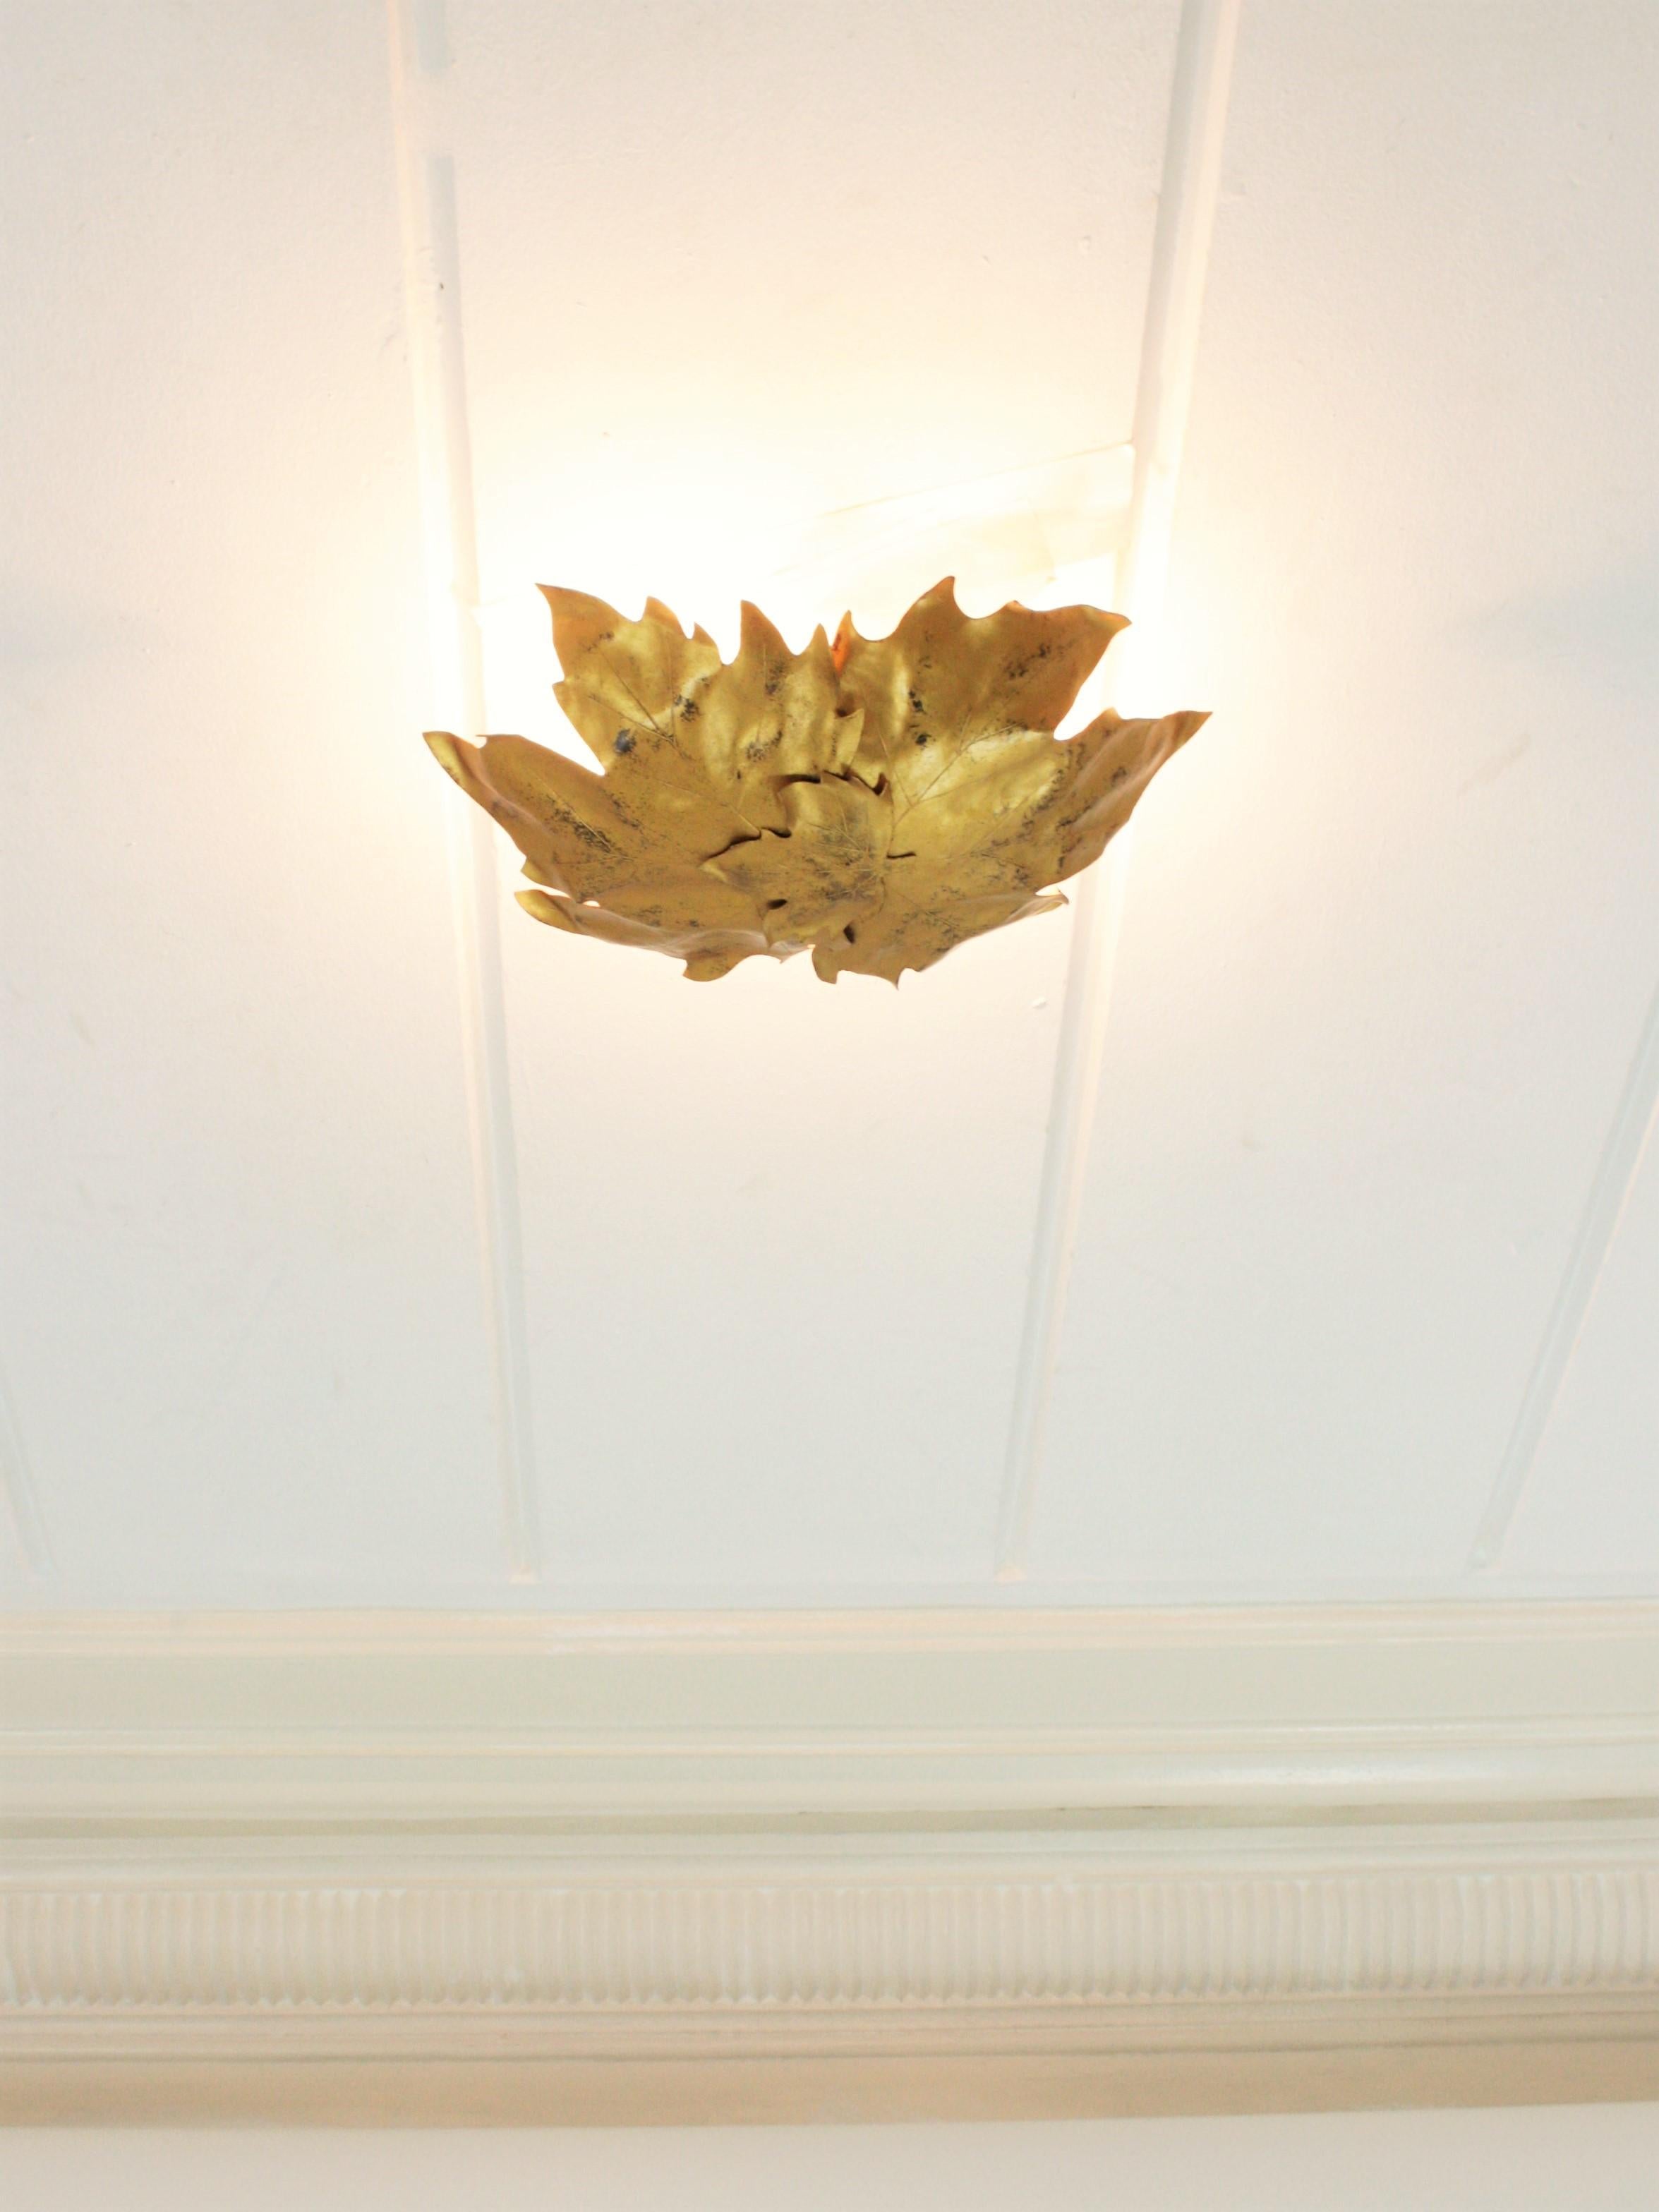 Leaves Shape Ceiling Light Fixture / Wall Sconce in Gilt Metal, 1960s For Sale 5